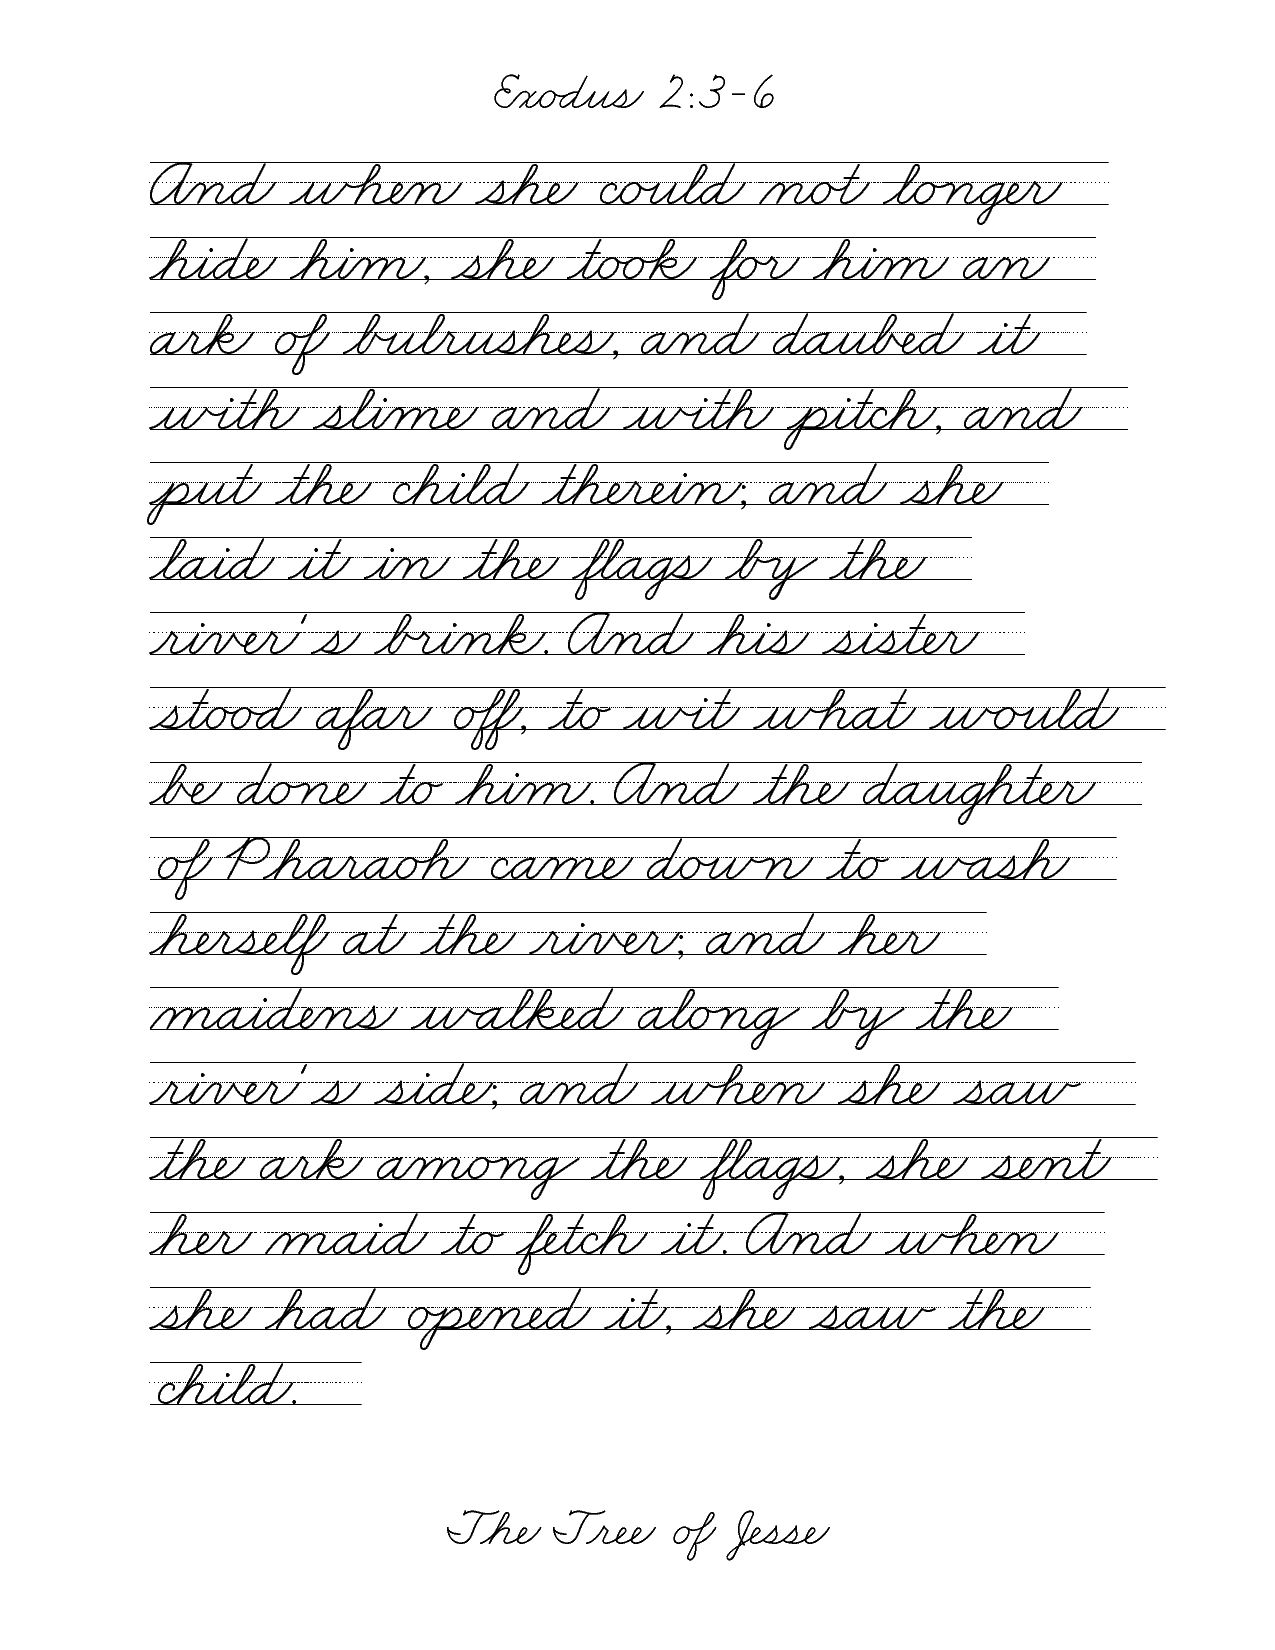 essay-writing-service-learn-how-to-write-words-in-cursive-2017-09-30